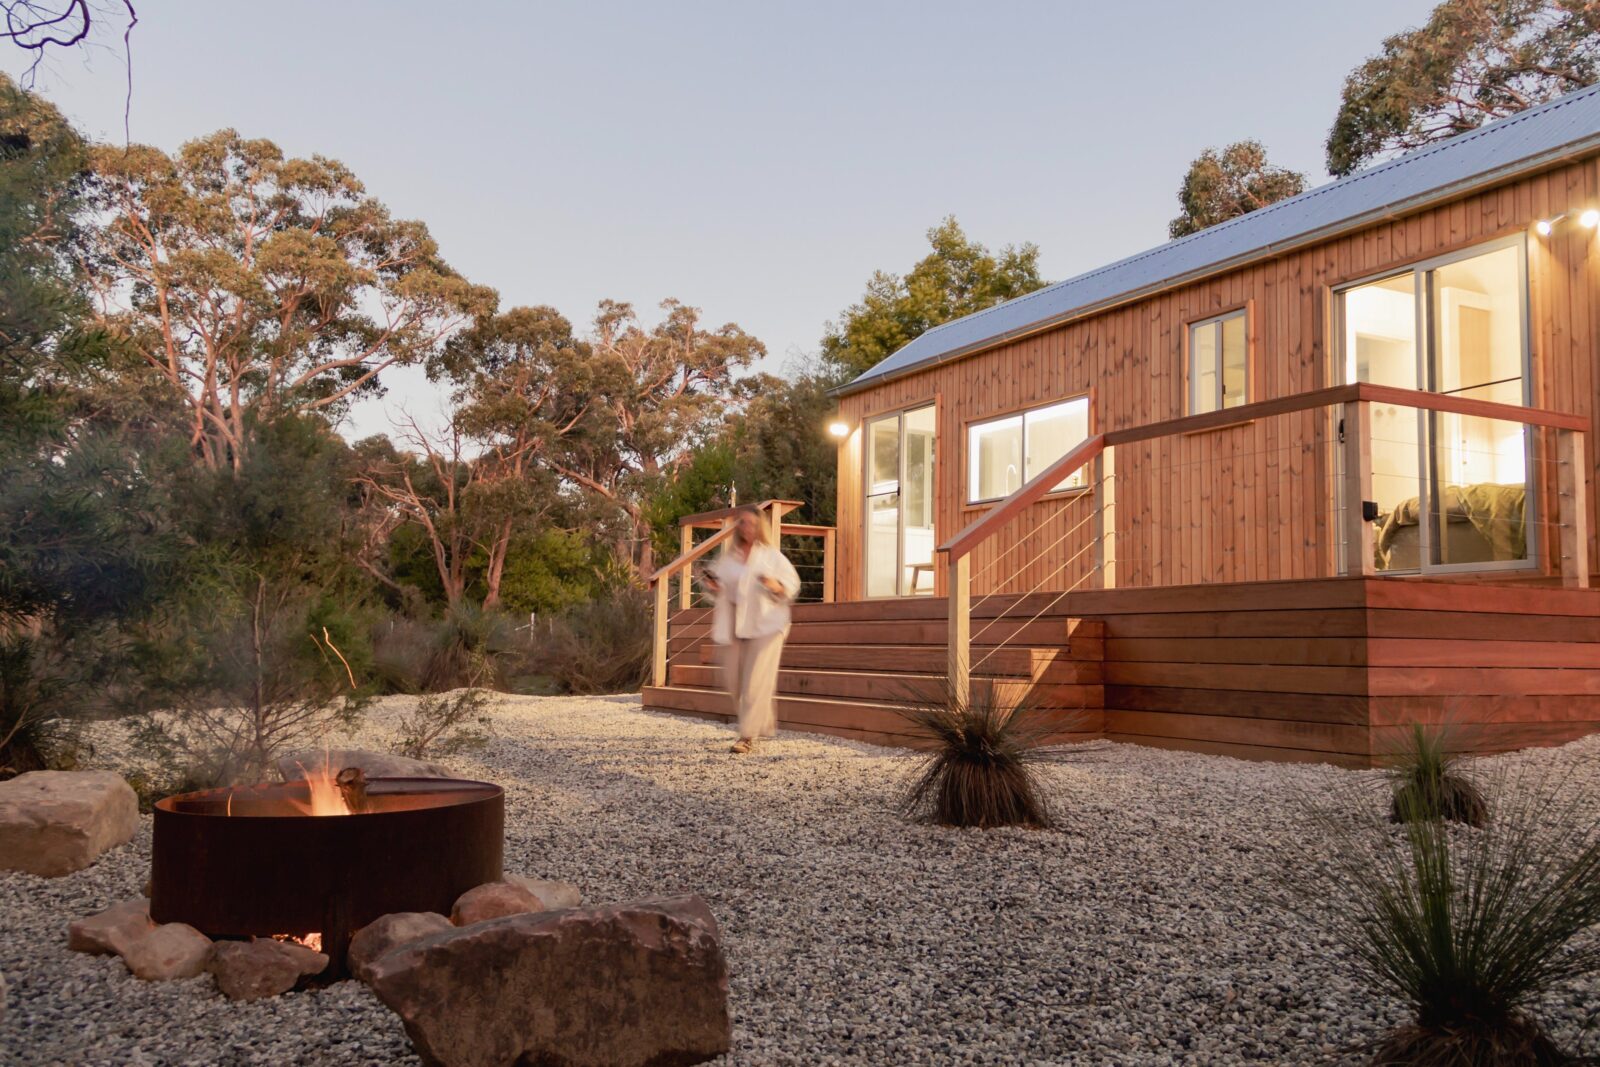 Exterior of Grass Tree Tiny Home and fire pit